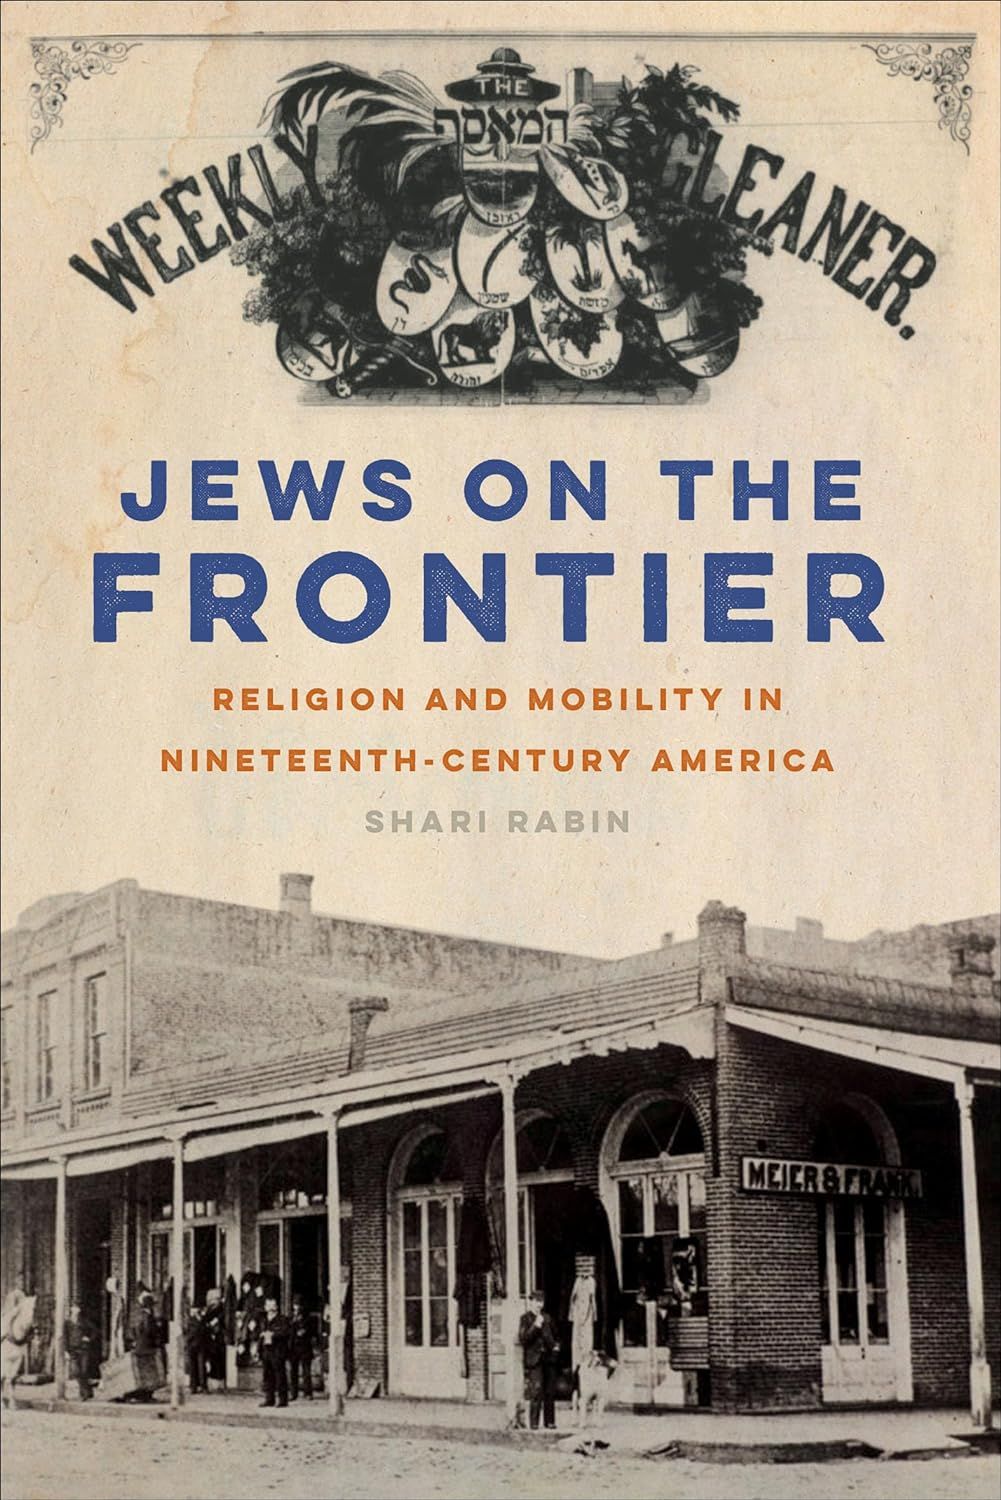 r- Religion and Mobility in Nineteenth-Century America book cover